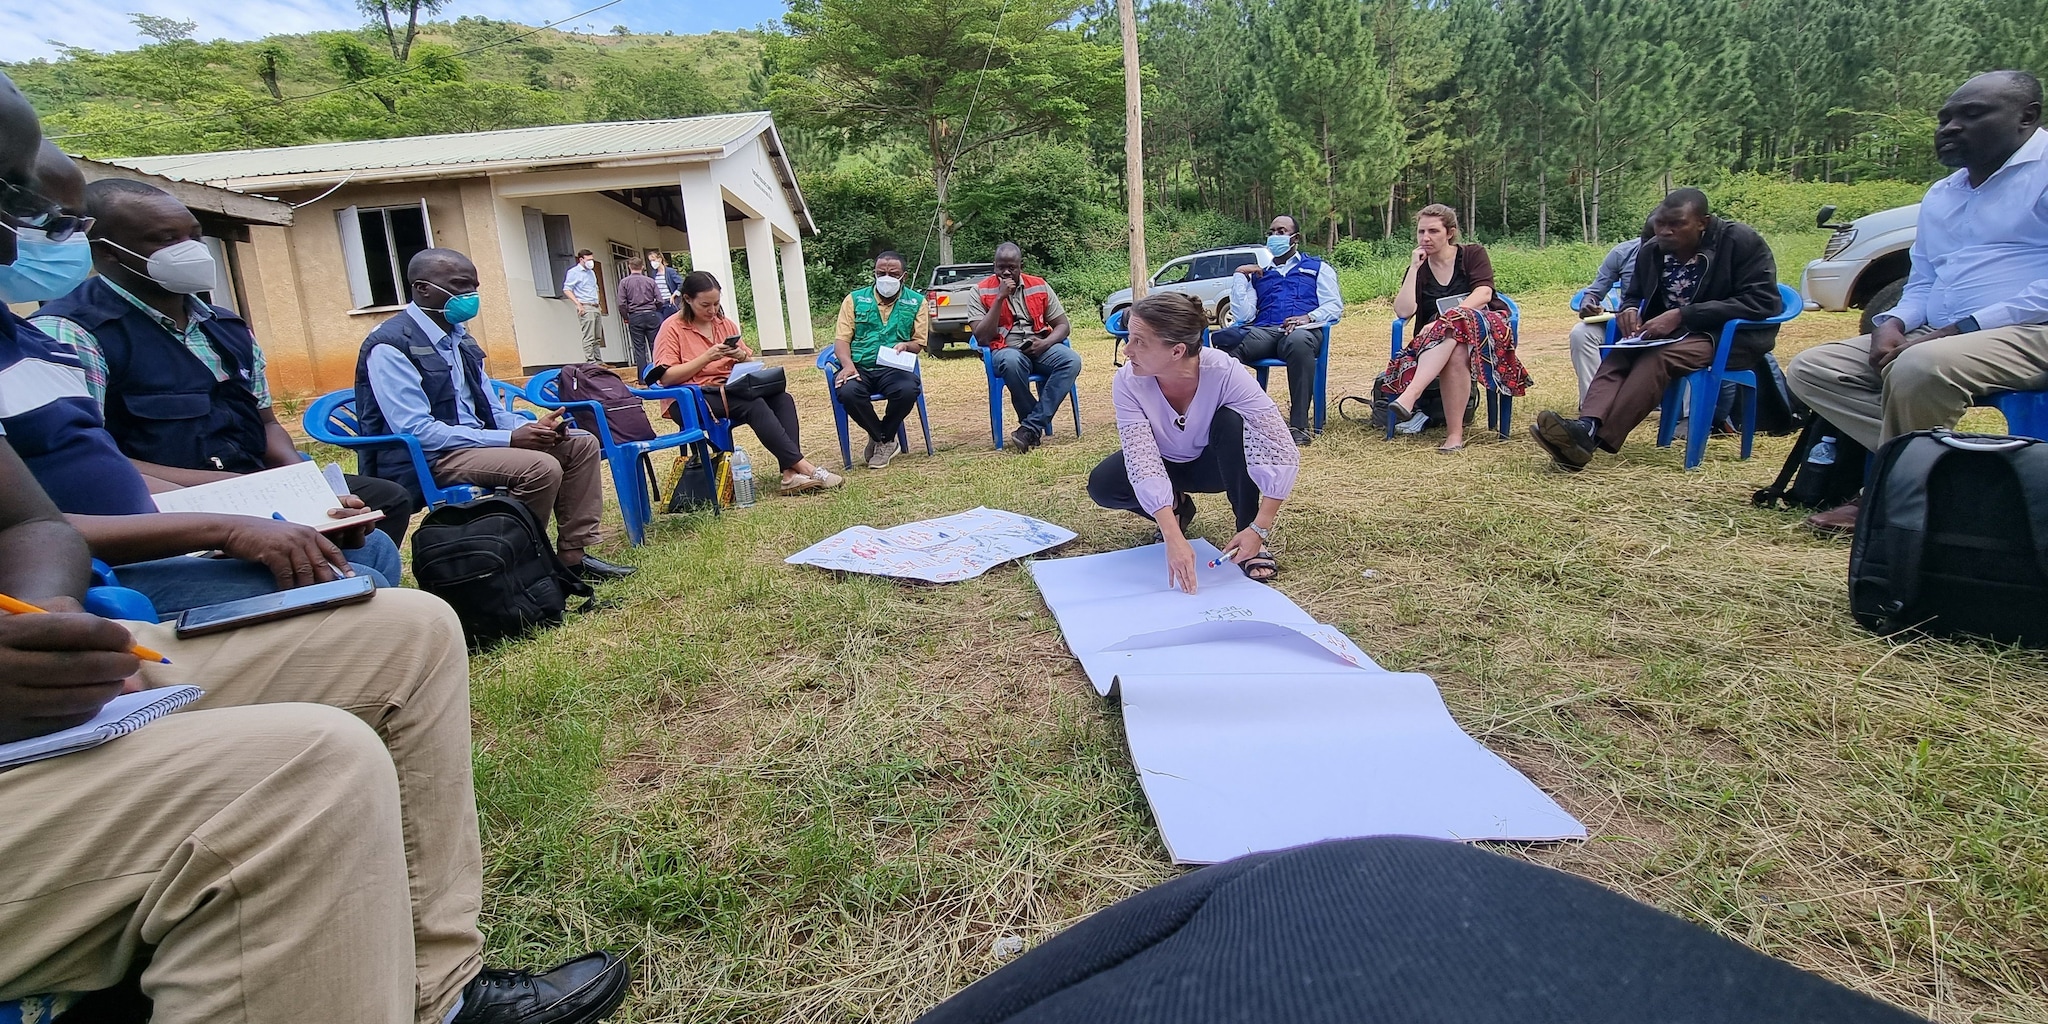 CDC Director and participants outside in Uganda organizing surveillance activities during the Ebola response.